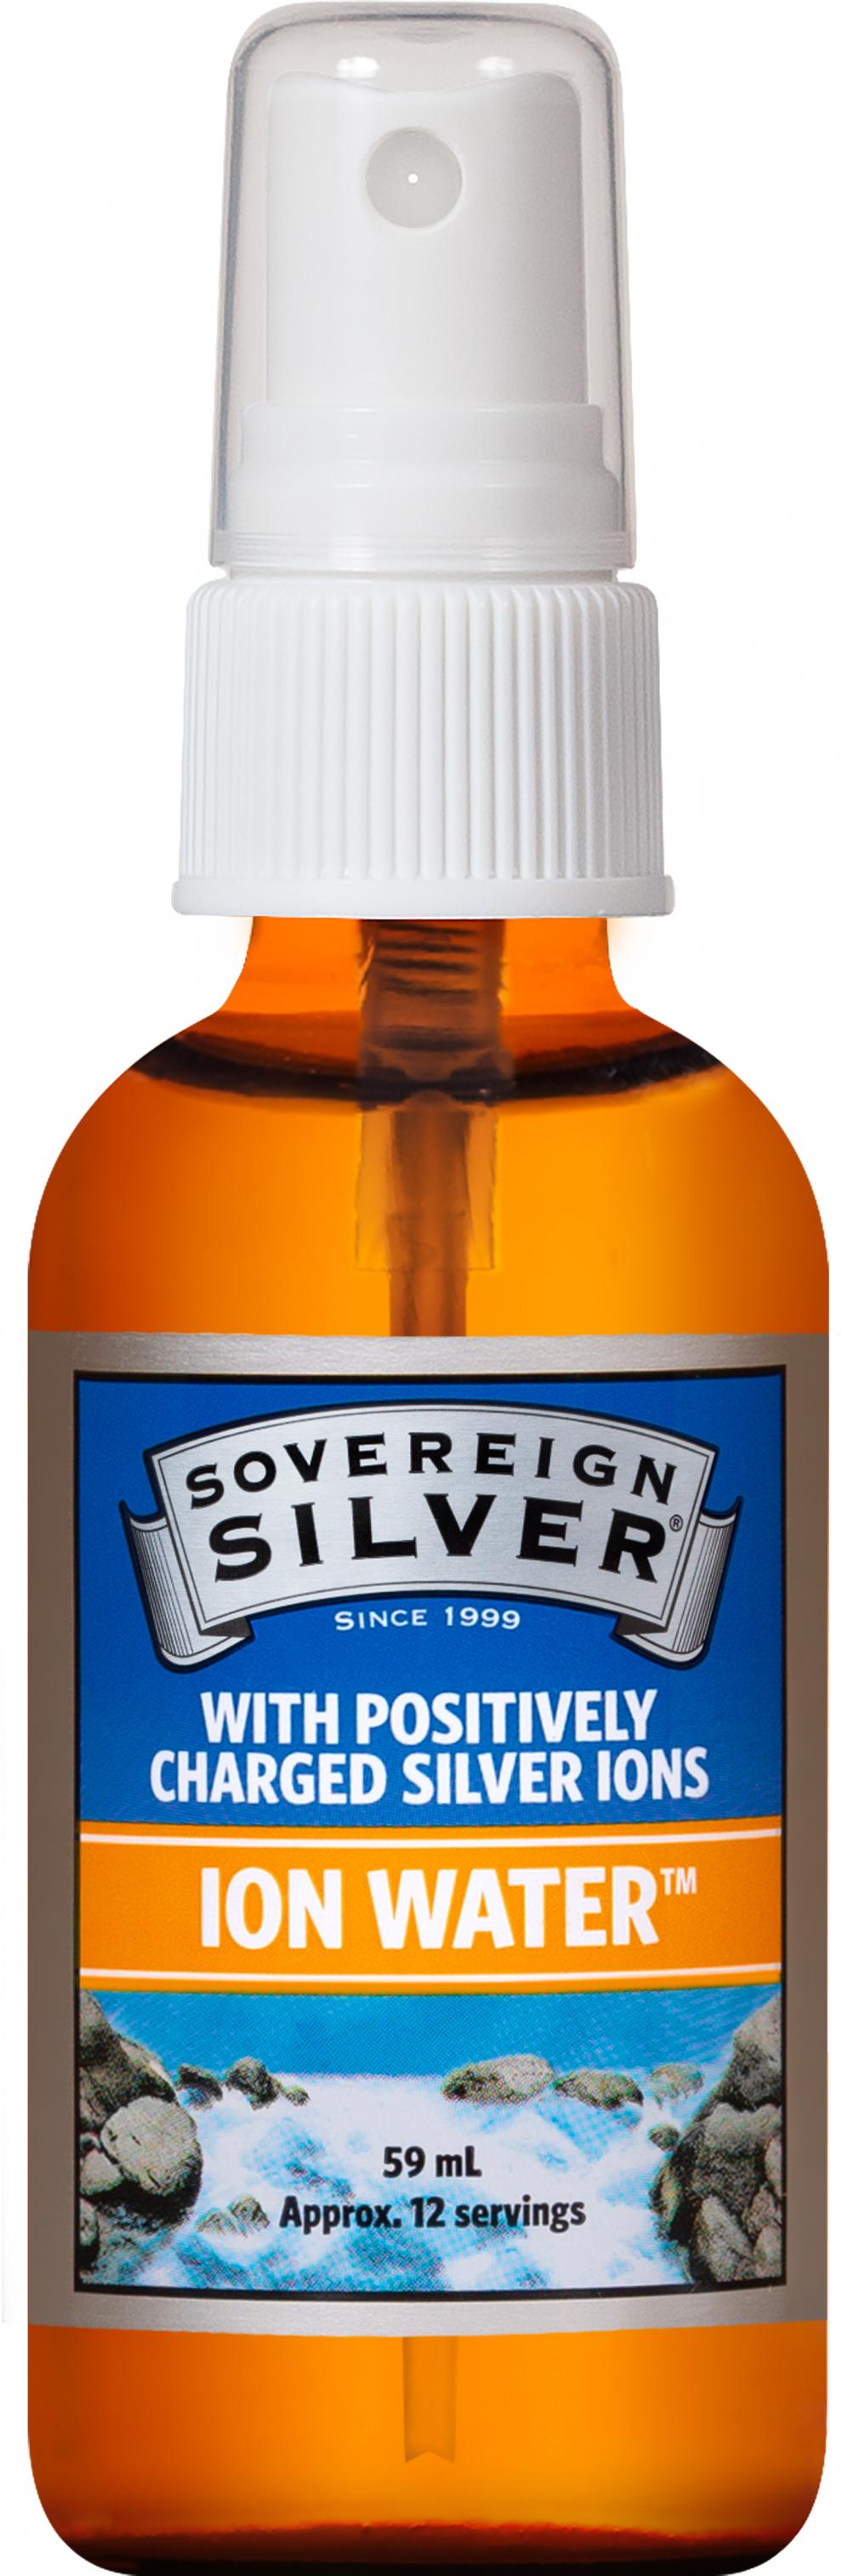 Sovereign Silver ION Water 59ml Spray Top